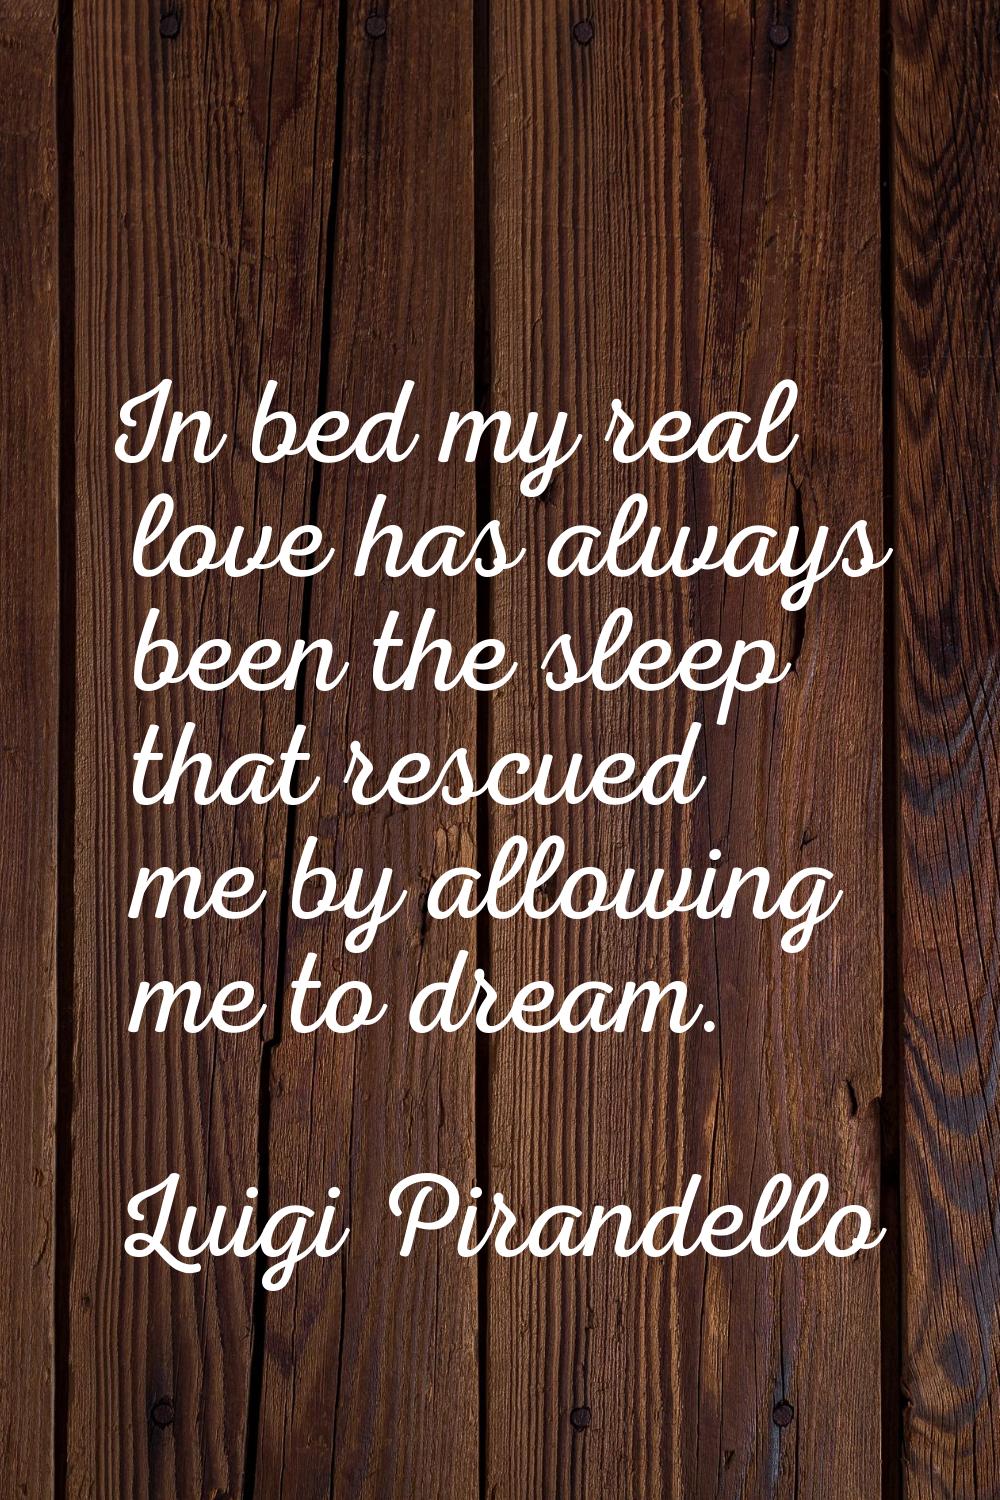 In bed my real love has always been the sleep that rescued me by allowing me to dream.